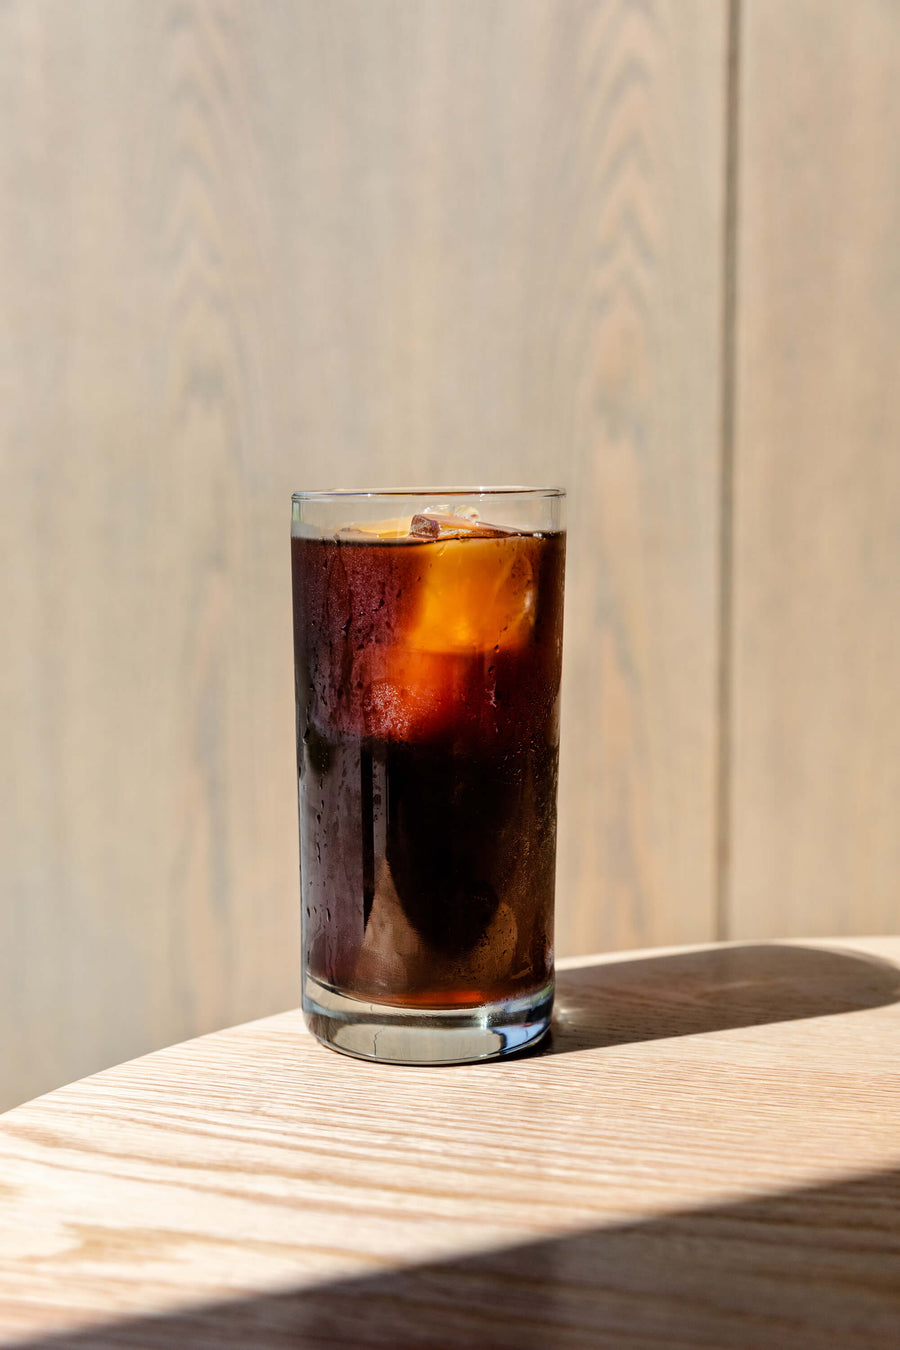  Hario Mizudashi Cold Brewer | Cold Brew Carafe | Brew Cafe Quality Cold Brew from Home | Glass of Cold Brew | Equator Coffees